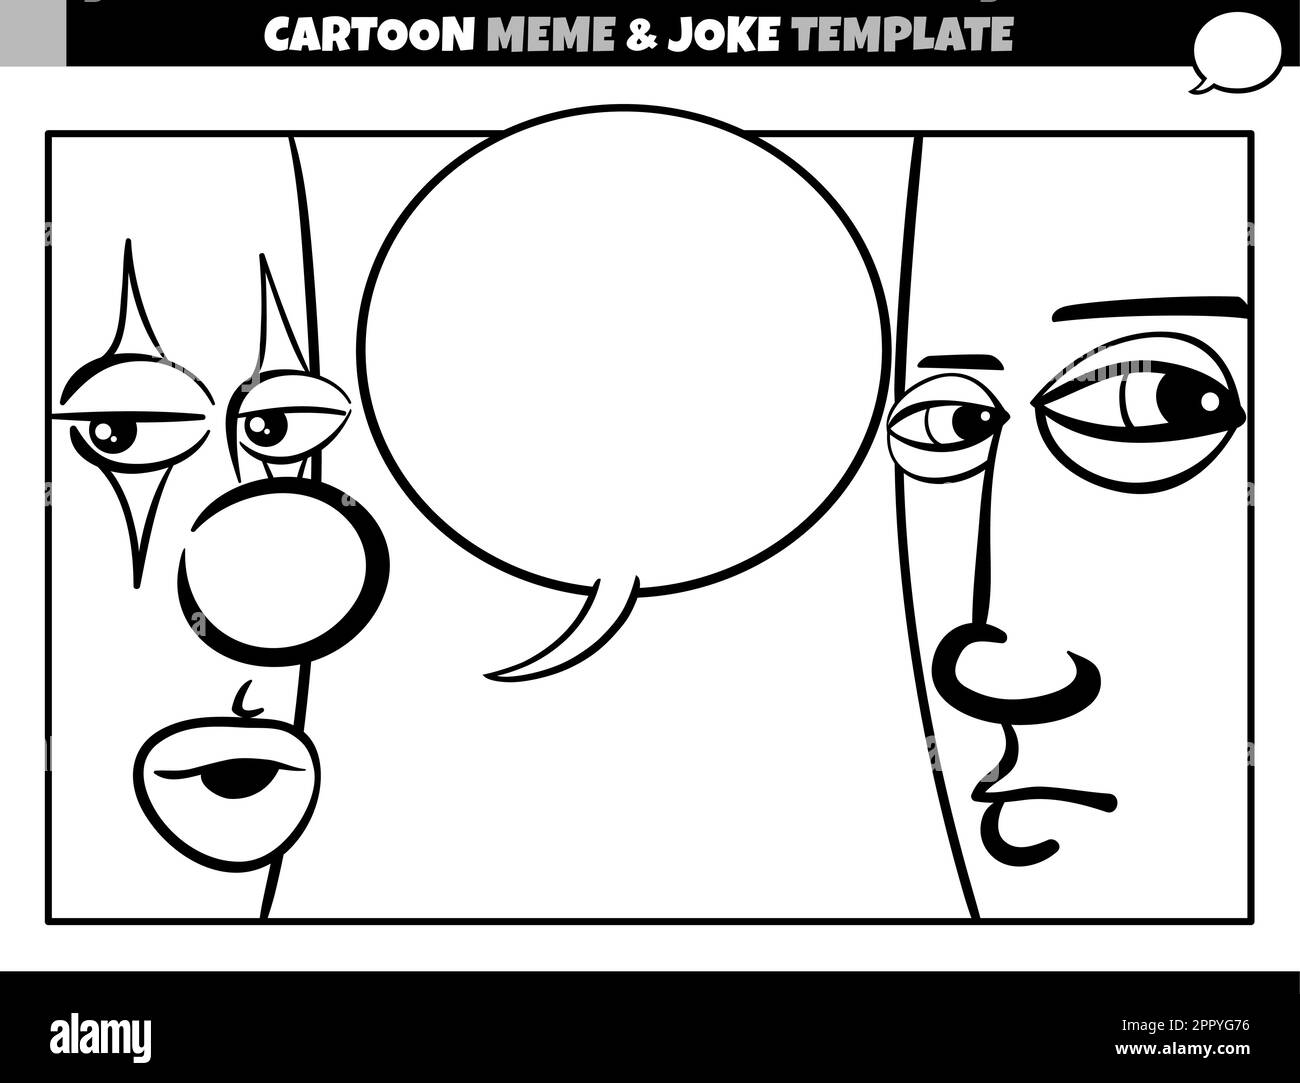 black and white cartoon meme template with clown and man Stock Vector